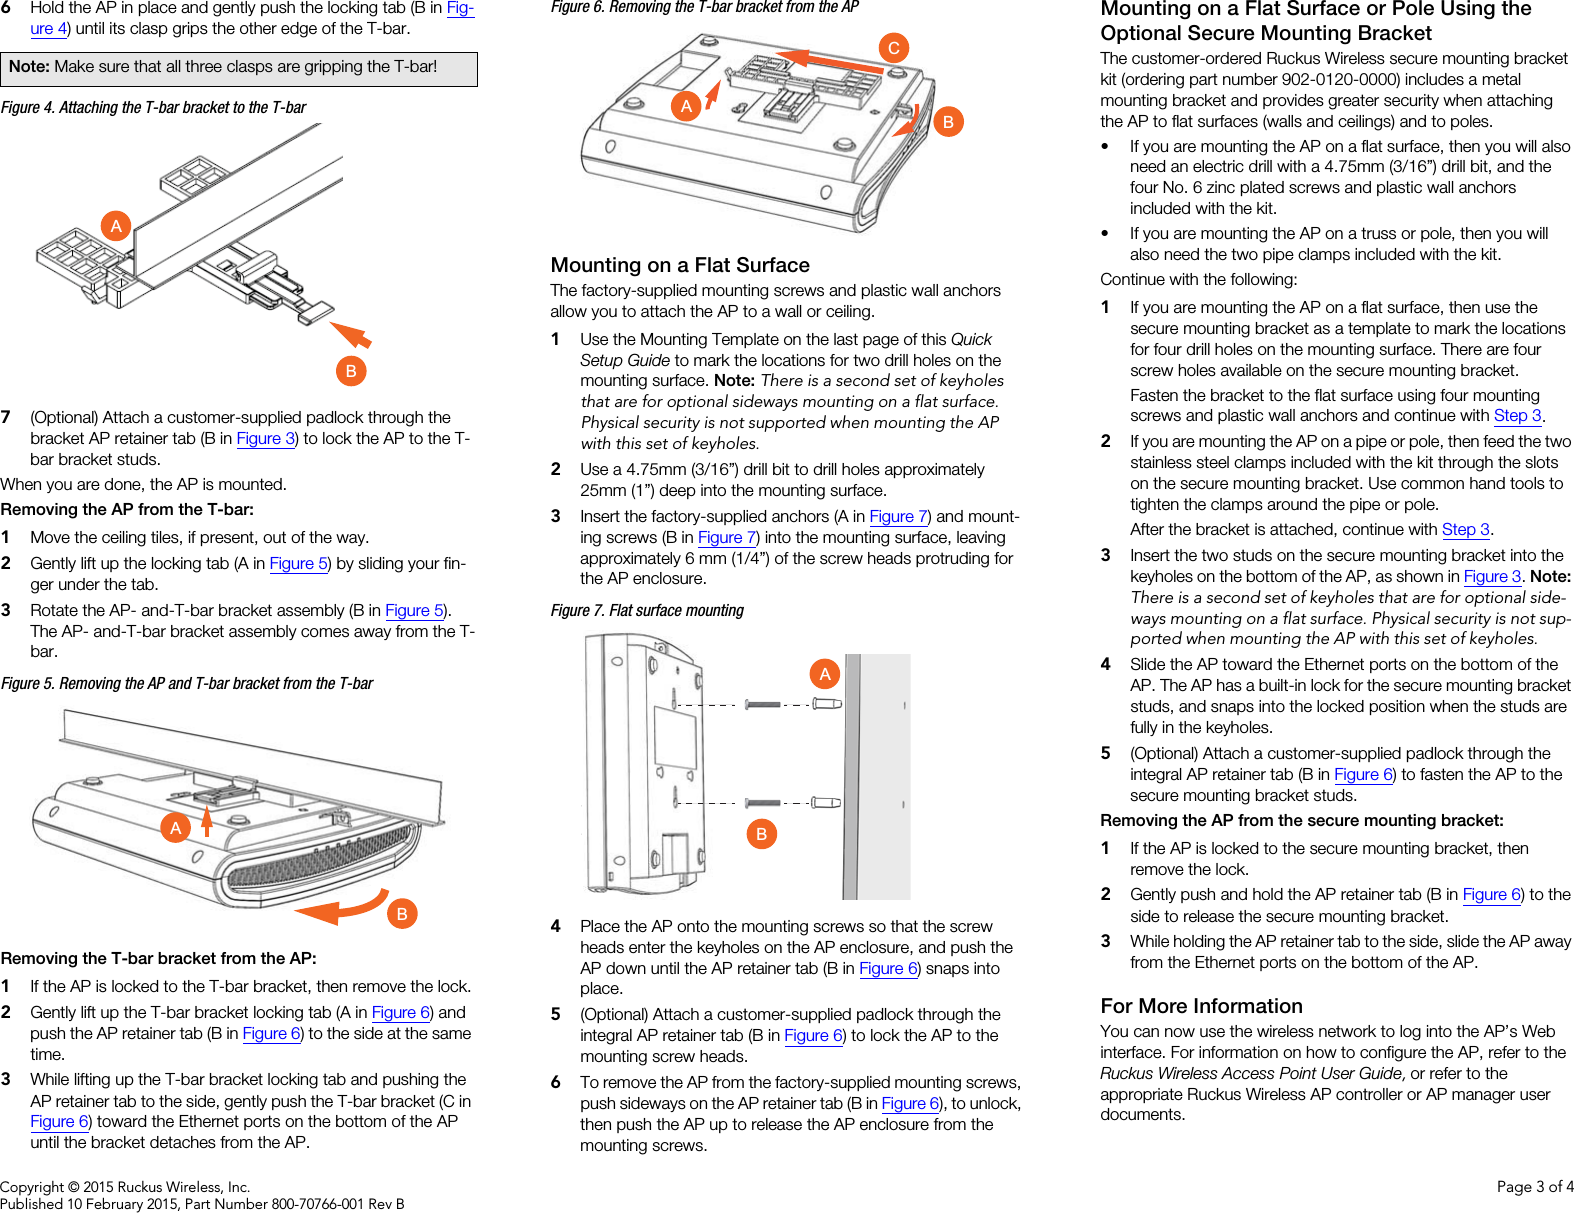 Copyright © 2015 Ruckus Wireless, Inc. Page 3 of 4Published 10 February 2015, Part Number 800-70766-001 Rev B6Hold the AP in place and gently push the locking tab (B in Fig-ure 4) until its clasp grips the other edge of the T-bar.Figure 4. Attaching the T-bar bracket to the T-bar7(Optional) Attach a customer-supplied padlock through the bracket AP retainer tab (B in Figure 3) to lock the AP to the T-bar bracket studs.When you are done, the AP is mounted.Removing the AP from the T-bar: 1Move the ceiling tiles, if present, out of the way.2Gently lift up the locking tab (A in Figure 5) by sliding your fin-ger under the tab. 3Rotate the AP- and-T-bar bracket assembly (B in Figure 5). The AP- and-T-bar bracket assembly comes away from the T-bar.Figure 5. Removing the AP and T-bar bracket from the T-barRemoving the T-bar bracket from the AP: 1If the AP is locked to the T-bar bracket, then remove the lock.2Gently lift up the T-bar bracket locking tab (A in Figure 6) and push the AP retainer tab (B in Figure 6) to the side at the same time. 3While lifting up the T-bar bracket locking tab and pushing the AP retainer tab to the side, gently push the T-bar bracket (C in Figure 6) toward the Ethernet ports on the bottom of the AP until the bracket detaches from the AP.Figure 6. Removing the T-bar bracket from the APMounting on a Flat SurfaceThe factory-supplied mounting screws and plastic wall anchors allow you to attach the AP to a wall or ceiling.1Use the Mounting Template on the last page of this Quick Setup Guide to mark the locations for two drill holes on the mounting surface. Note: There is a second set of keyholes that are for optional sideways mounting on a flat surface. Physical security is not supported when mounting the AP with this set of keyholes. 2Use a 4.75mm (3/16”) drill bit to drill holes approximately 25mm (1”) deep into the mounting surface.3Insert the factory-supplied anchors (A in Figure 7) and mount-ing screws (B in Figure 7) into the mounting surface, leaving approximately 6 mm (1/4”) of the screw heads protruding for the AP enclosure. Figure 7. Flat surface mounting4Place the AP onto the mounting screws so that the screw heads enter the keyholes on the AP enclosure, and push the AP down until the AP retainer tab (B in Figure 6) snaps into place.5(Optional) Attach a customer-supplied padlock through the integral AP retainer tab (B in Figure 6) to lock the AP to the mounting screw heads.6To remove the AP from the factory-supplied mounting screws, push sideways on the AP retainer tab (B in Figure 6), to unlock, then push the AP up to release the AP enclosure from the mounting screws.Mounting on a Flat Surface or Pole Using the Optional Secure Mounting BracketThe customer-ordered Ruckus Wireless secure mounting bracket kit (ordering part number 902-0120-0000) includes a metal mounting bracket and provides greater security when attaching the AP to flat surfaces (walls and ceilings) and to poles. • If you are mounting the AP on a flat surface, then you will also need an electric drill with a 4.75mm (3/16”) drill bit, and the four No. 6 zinc plated screws and plastic wall anchors included with the kit. • If you are mounting the AP on a truss or pole, then you will also need the two pipe clamps included with the kit.Continue with the following:1If you are mounting the AP on a flat surface, then use the secure mounting bracket as a template to mark the locations for four drill holes on the mounting surface. There are four screw holes available on the secure mounting bracket. Fasten the bracket to the flat surface using four mounting screws and plastic wall anchors and continue with Step 3.2If you are mounting the AP on a pipe or pole, then feed the two stainless steel clamps included with the kit through the slots on the secure mounting bracket. Use common hand tools to tighten the clamps around the pipe or pole.After the bracket is attached, continue with Step 3.3Insert the two studs on the secure mounting bracket into the keyholes on the bottom of the AP, as shown in Figure 3. Note: There is a second set of keyholes that are for optional side-ways mounting on a flat surface. Physical security is not sup-ported when mounting the AP with this set of keyholes. 4Slide the AP toward the Ethernet ports on the bottom of the AP. The AP has a built-in lock for the secure mounting bracket studs, and snaps into the locked position when the studs are fully in the keyholes.5(Optional) Attach a customer-supplied padlock through the integral AP retainer tab (B in Figure 6) to fasten the AP to the secure mounting bracket studs.Removing the AP from the secure mounting bracket: 1If the AP is locked to the secure mounting bracket, then remove the lock.2Gently push and hold the AP retainer tab (B in Figure 6) to the side to release the secure mounting bracket.3While holding the AP retainer tab to the side, slide the AP away from the Ethernet ports on the bottom of the AP.For More InformationYou can now use the wireless network to log into the AP’s Web interface. For information on how to configure the AP, refer to the Ruckus Wireless Access Point User Guide, or refer to the appropriate Ruckus Wireless AP controller or AP manager user documents. Note: Make sure that all three clasps are gripping the T-bar! ABABCBAAB